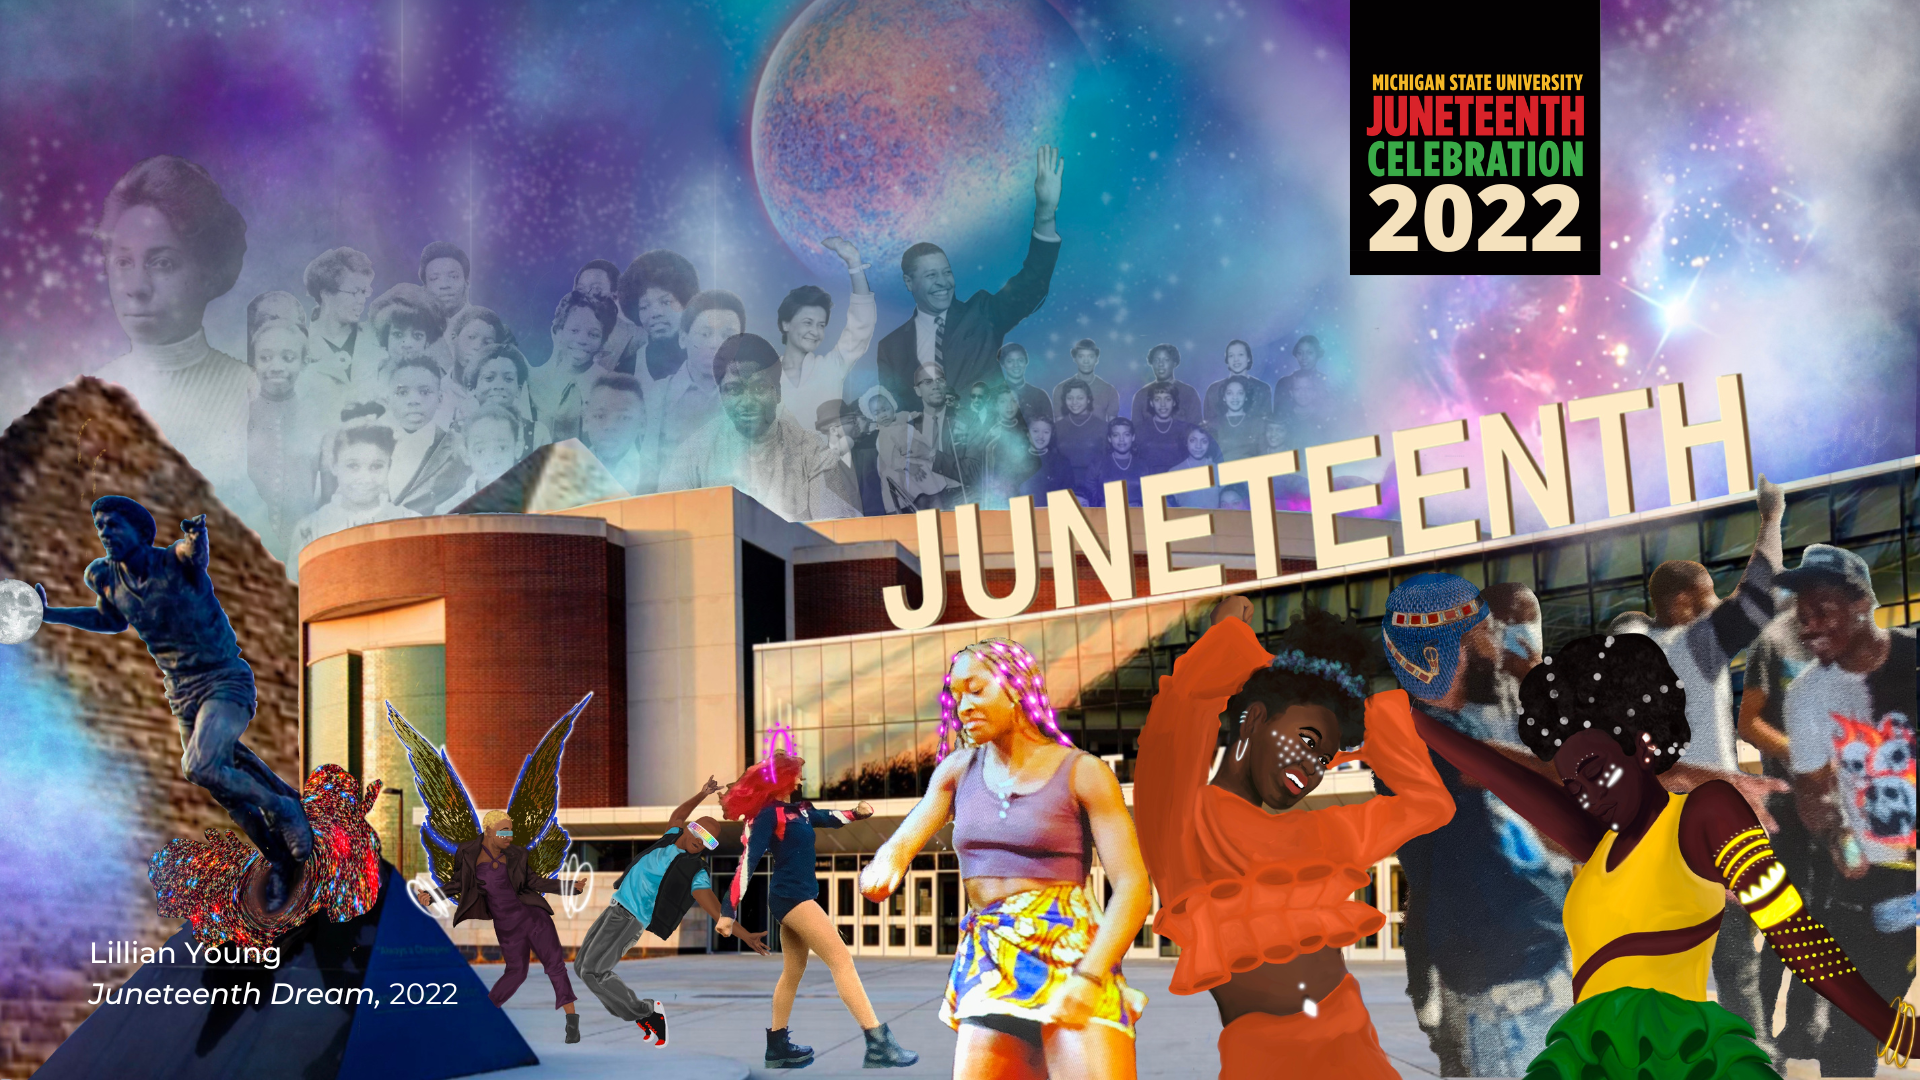 Juneteenth Dream by artist Lillian Young, 2022 featuring Afrofuturism theme